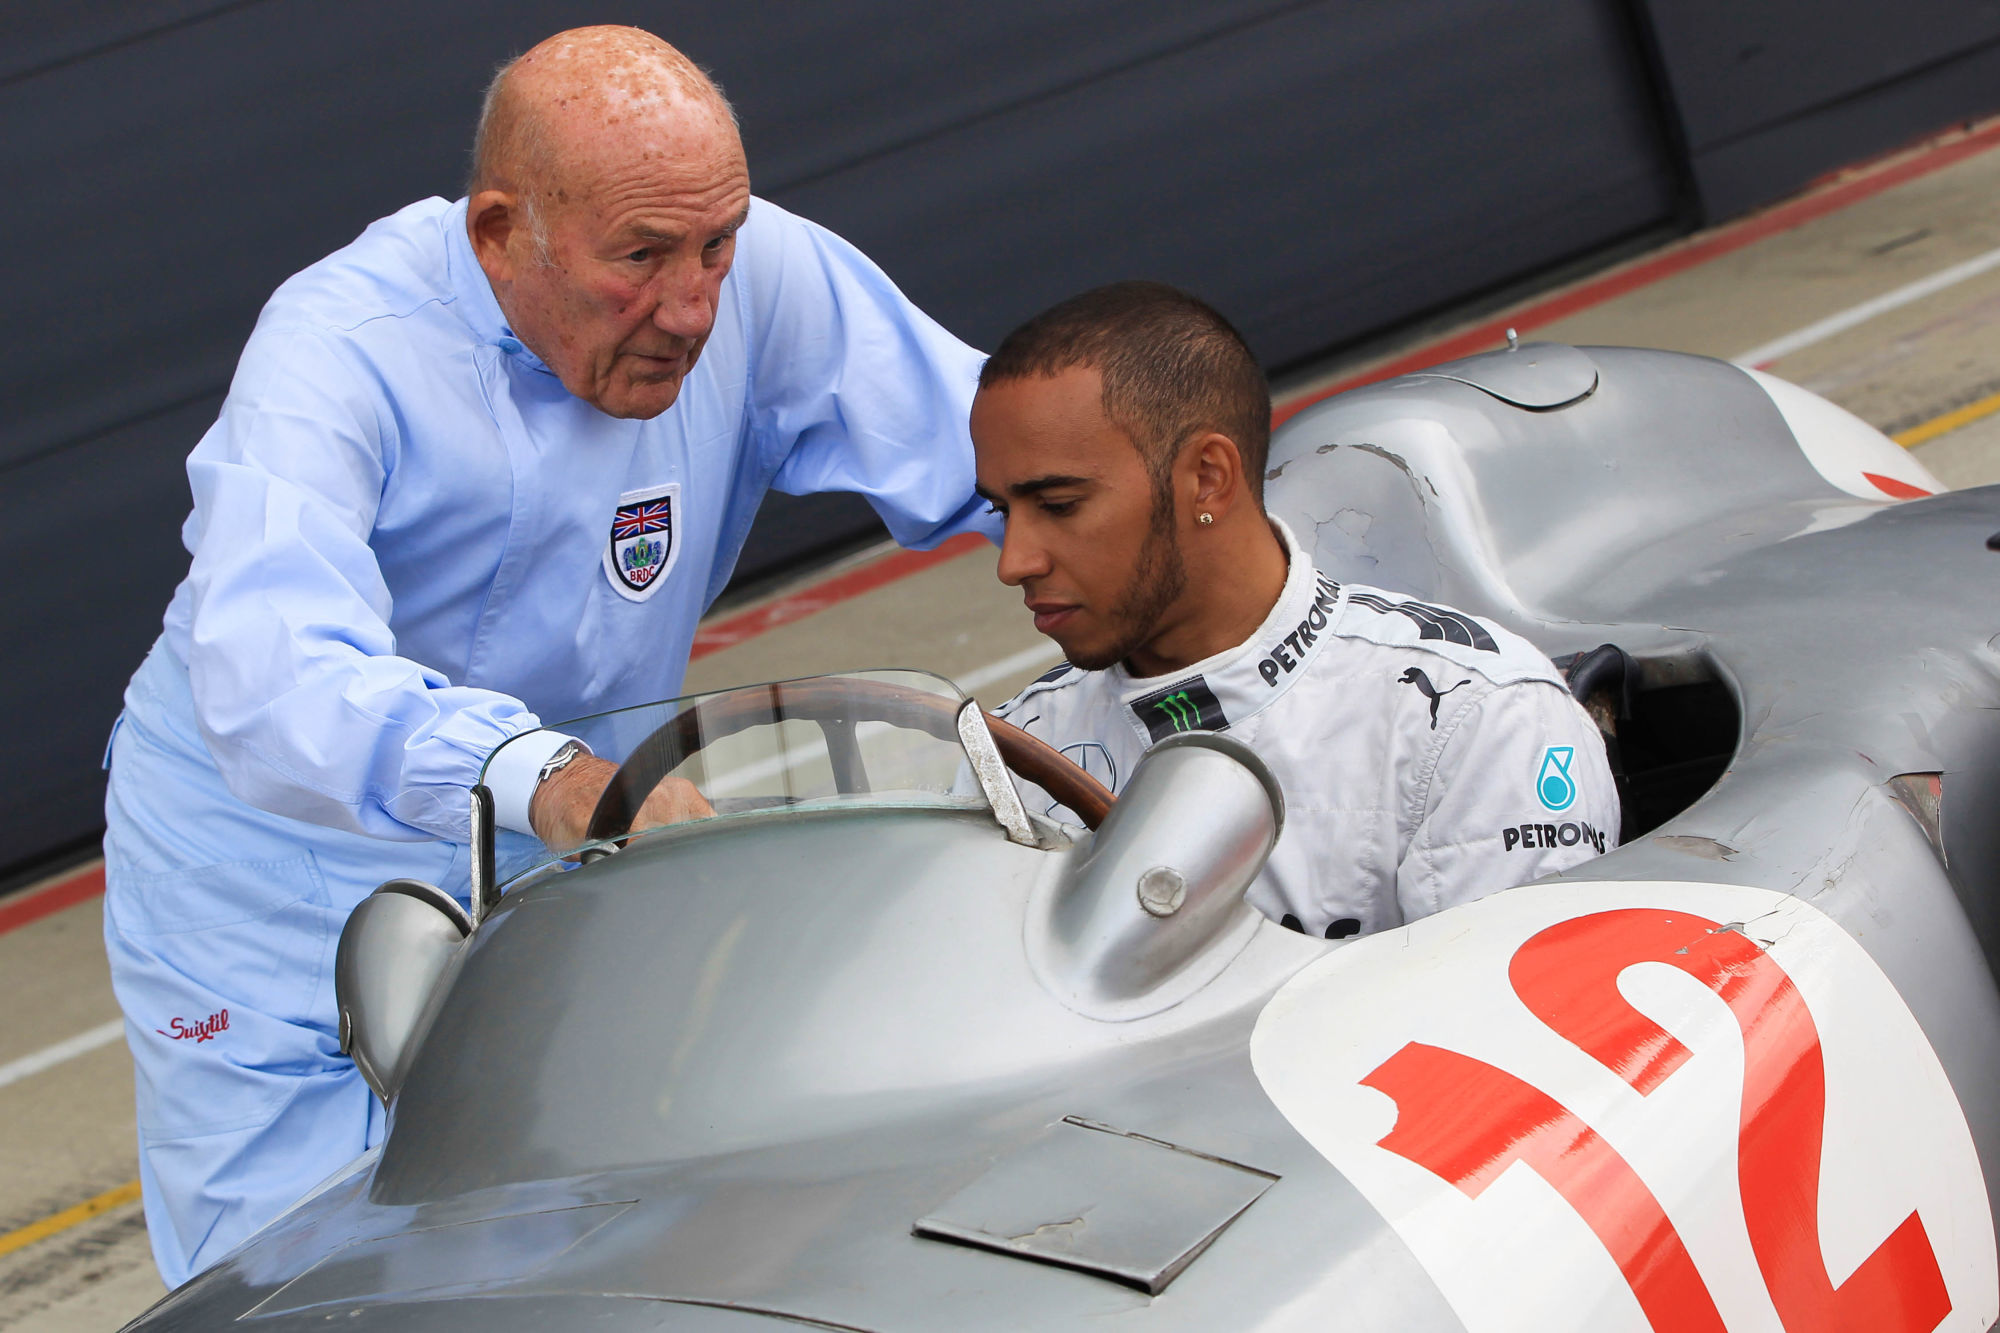 Stirling Moss et Lewis Hamilton 
Photo by Icon Sport